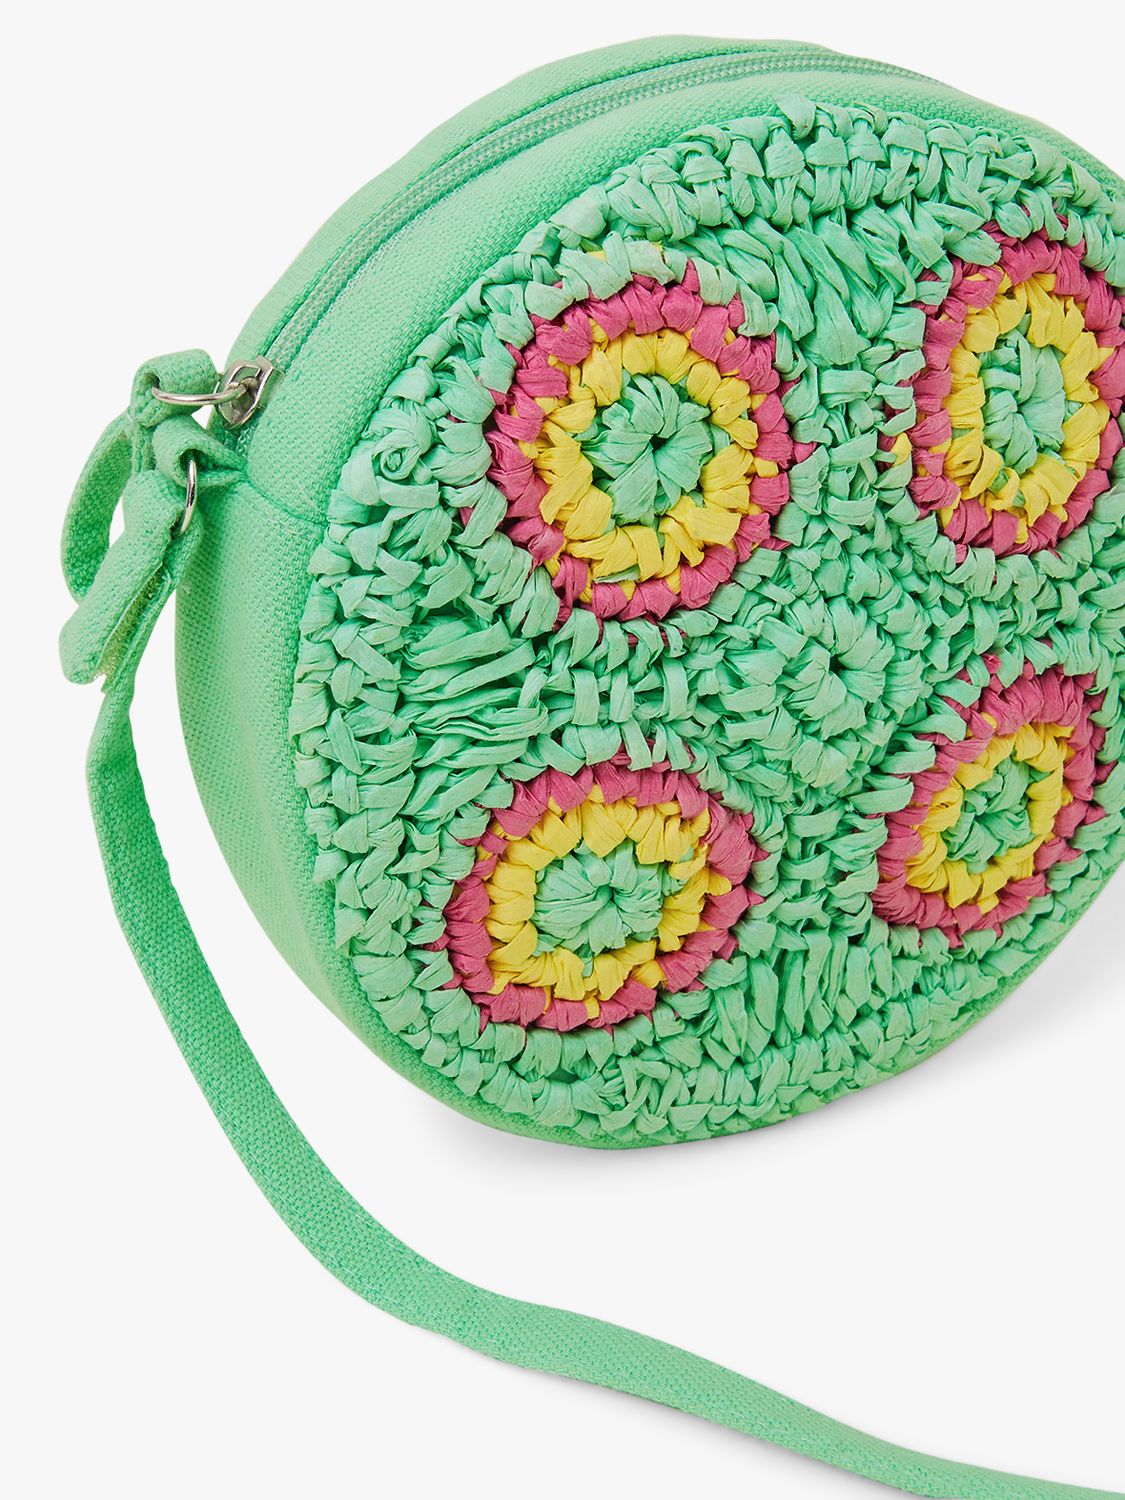 Angels by Accessorize Kids' Round Crochet Cross Body Bag, Green/Multi, One Size